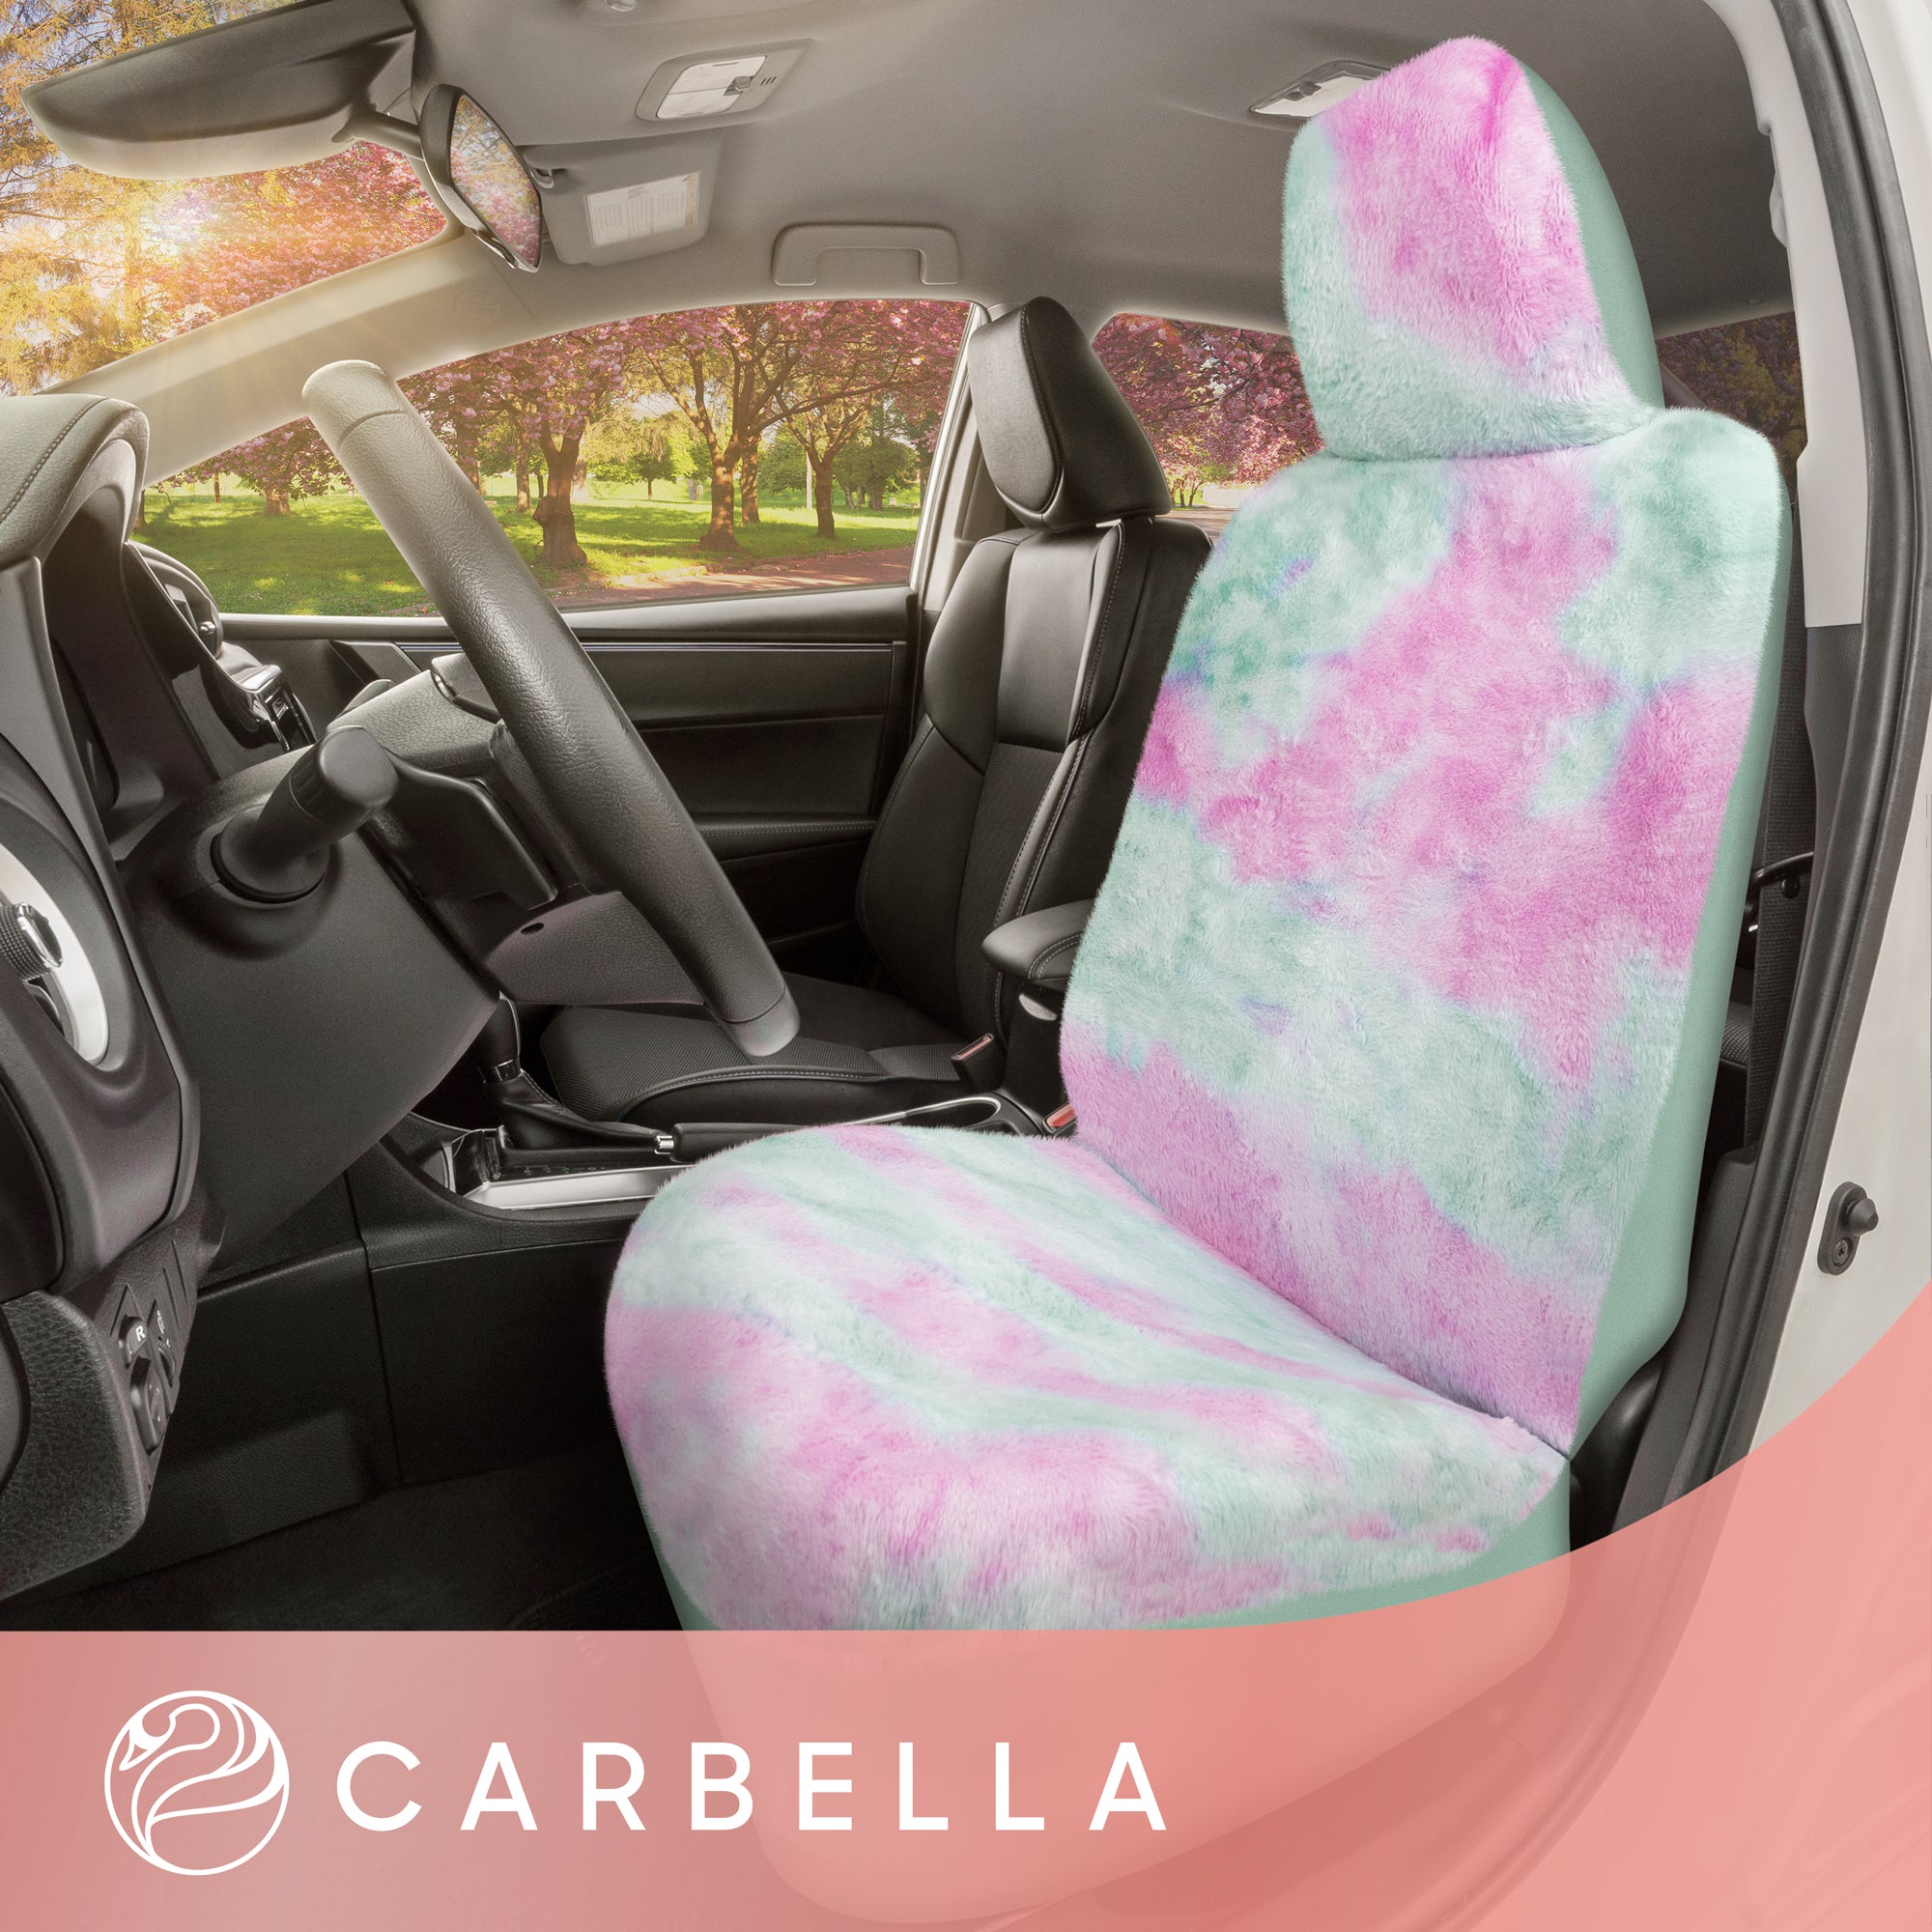 Carbella Tie-Dye Faux Fur Car Seat Cover, 1 Piece Mint Sheepskin Front Seat Cover for Cars with Soft and Plush Touch, Cute Automotive Interior Cover for Trucks Van SUV, Car Accessories for Women